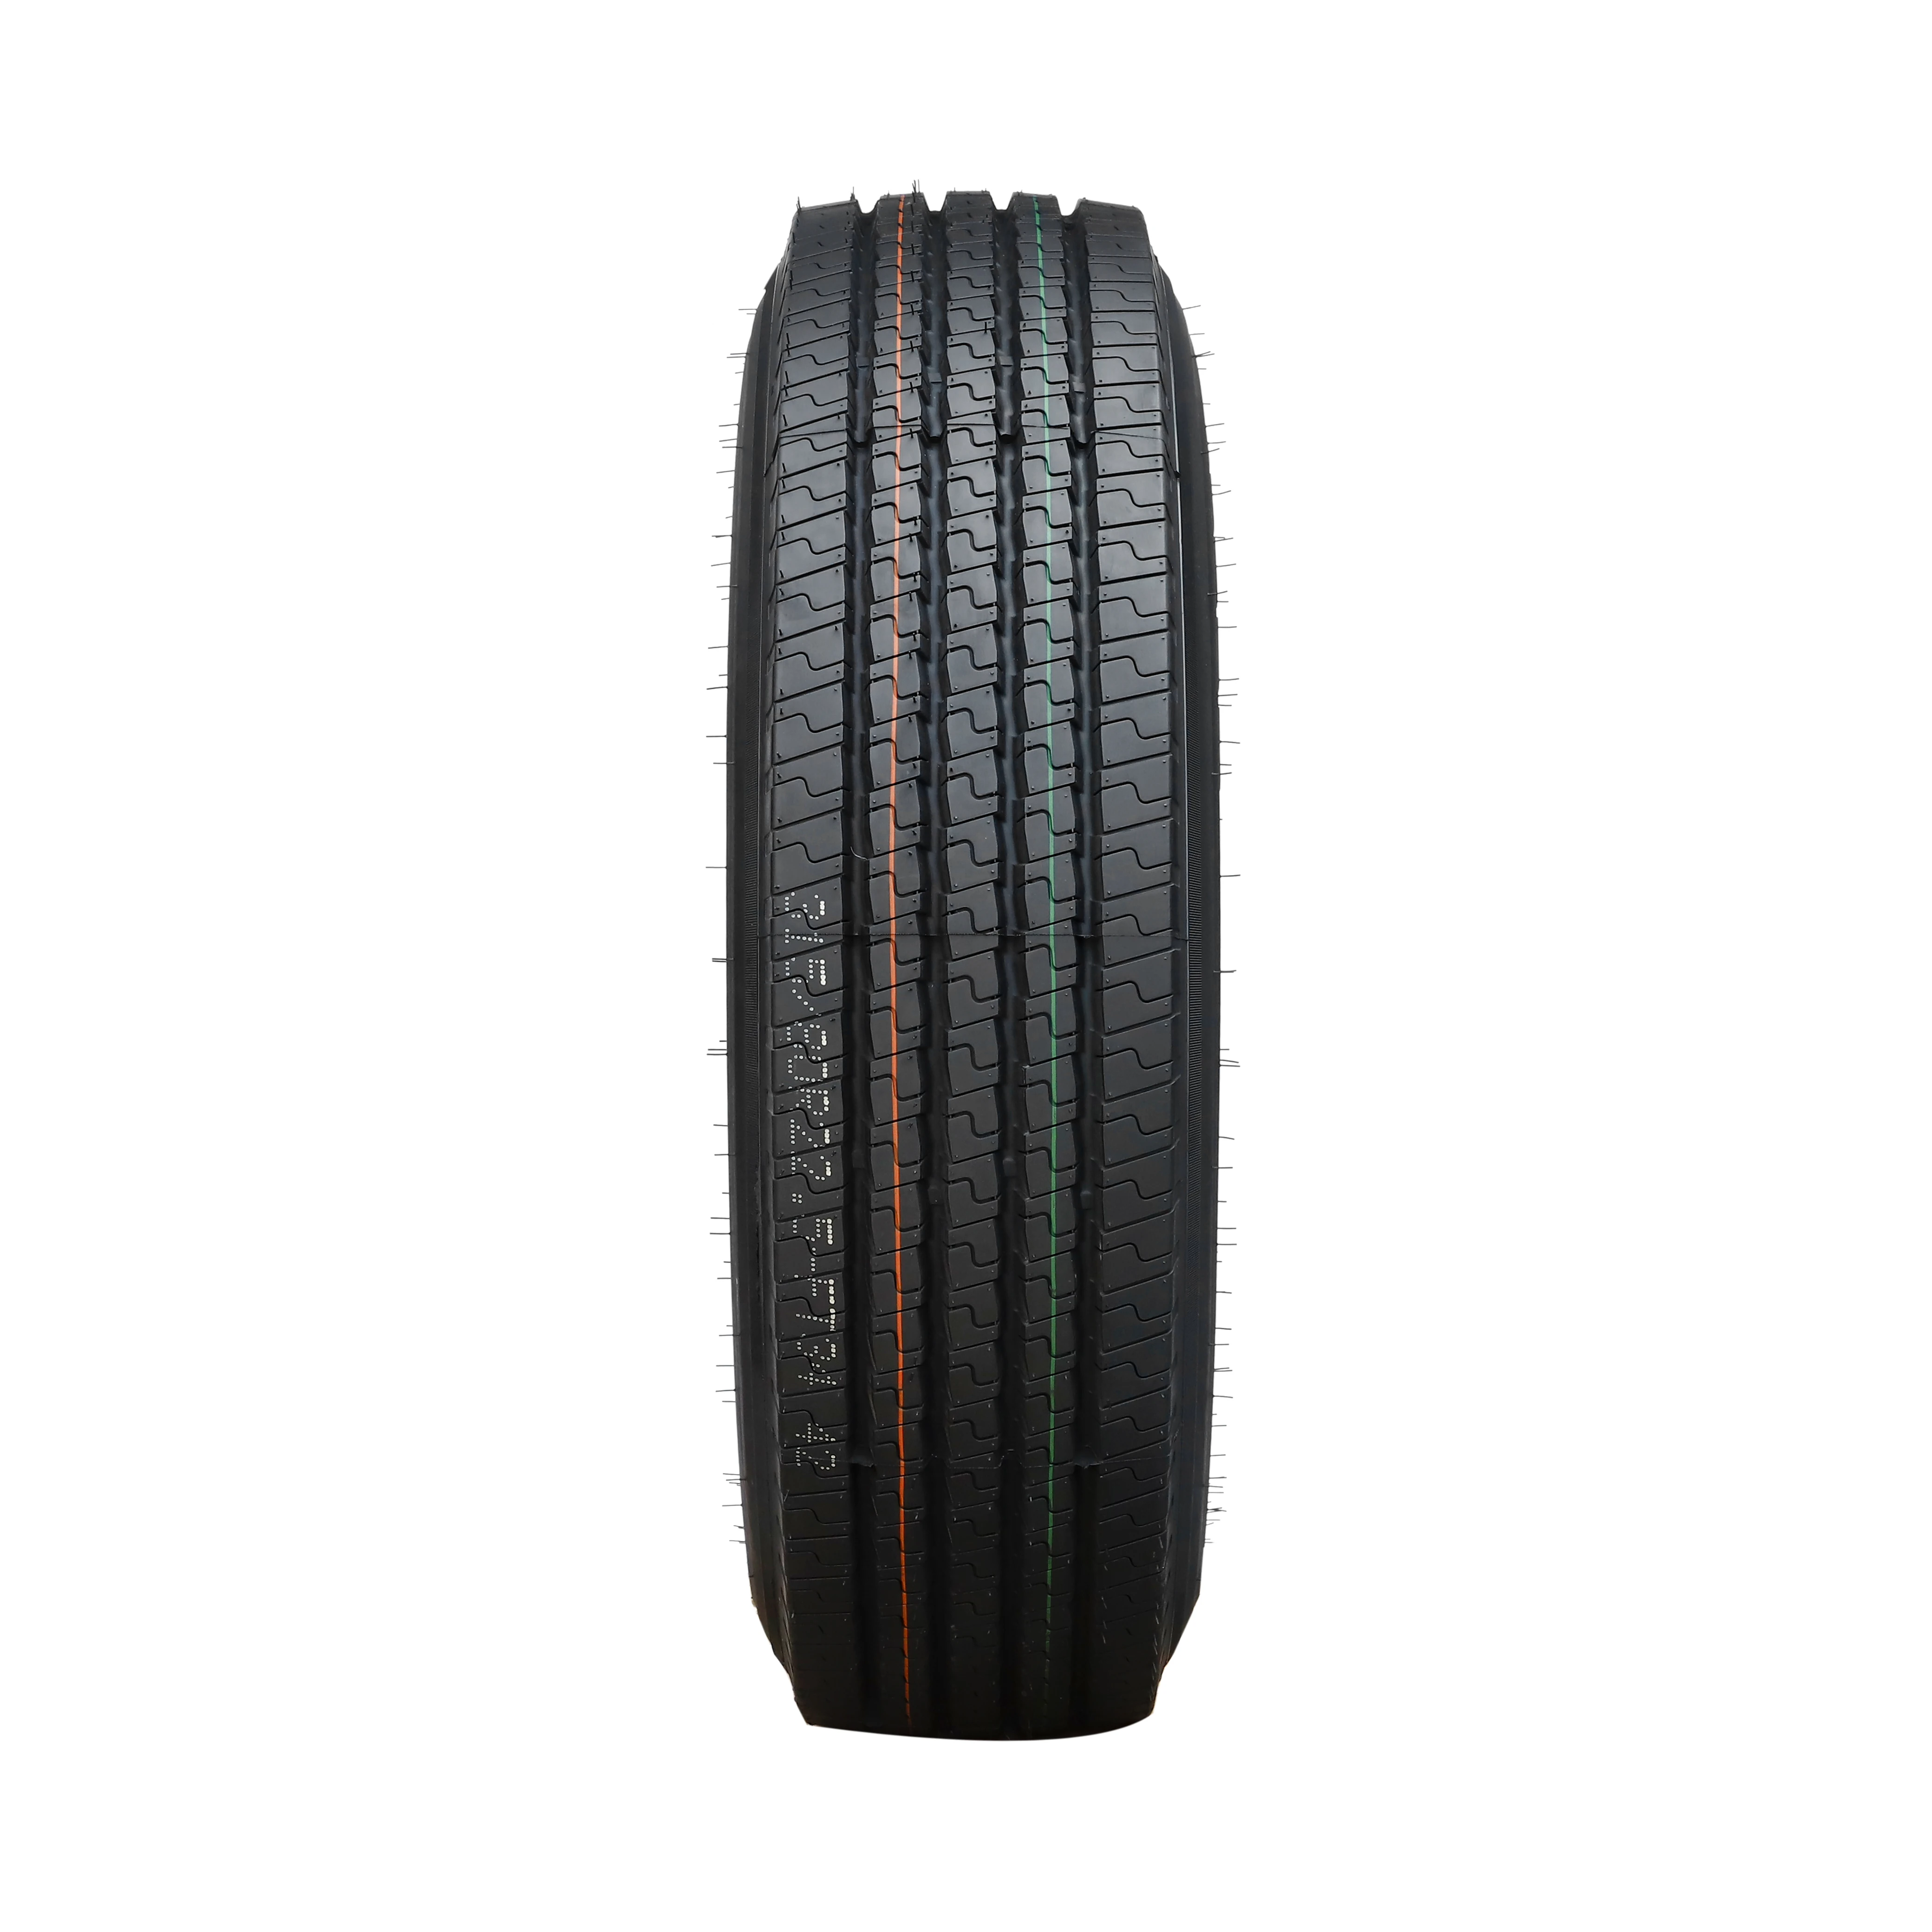 Tubeless radial 295/80R22.5 tyre for Africa market Truck and Bus Trailer tyres 11r22.5 truck tires